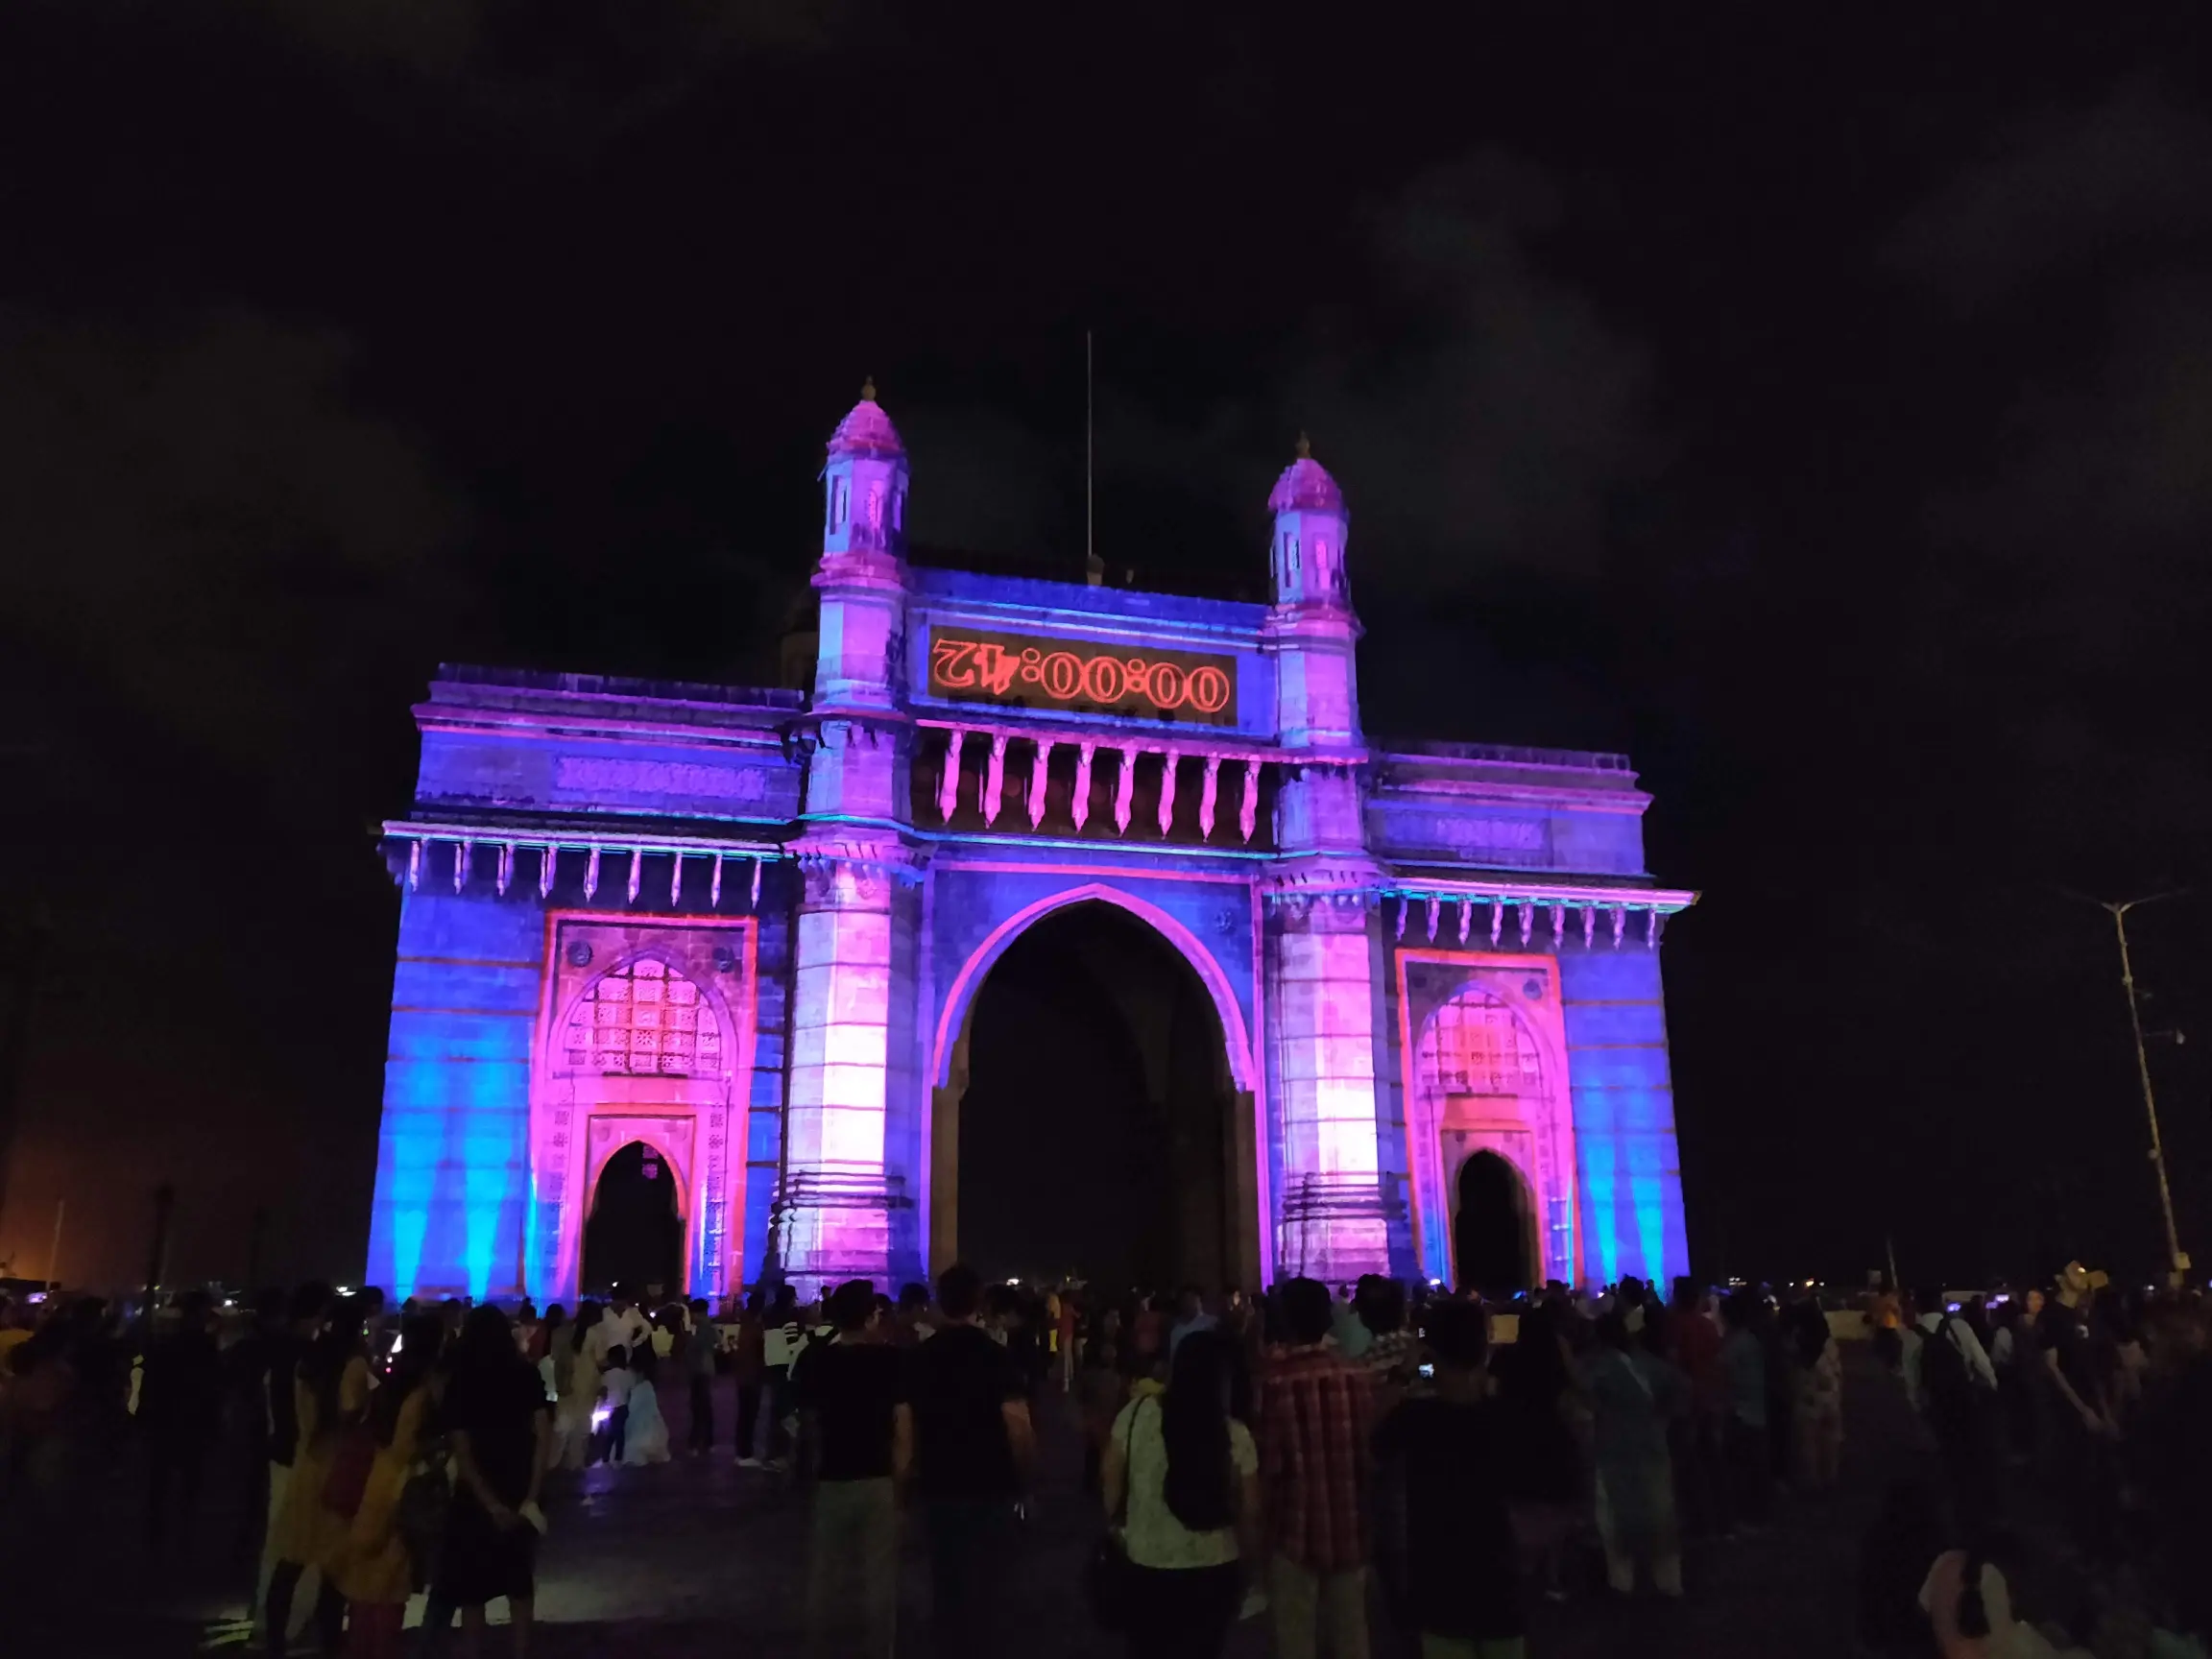 Light show projected on the Gateway of India